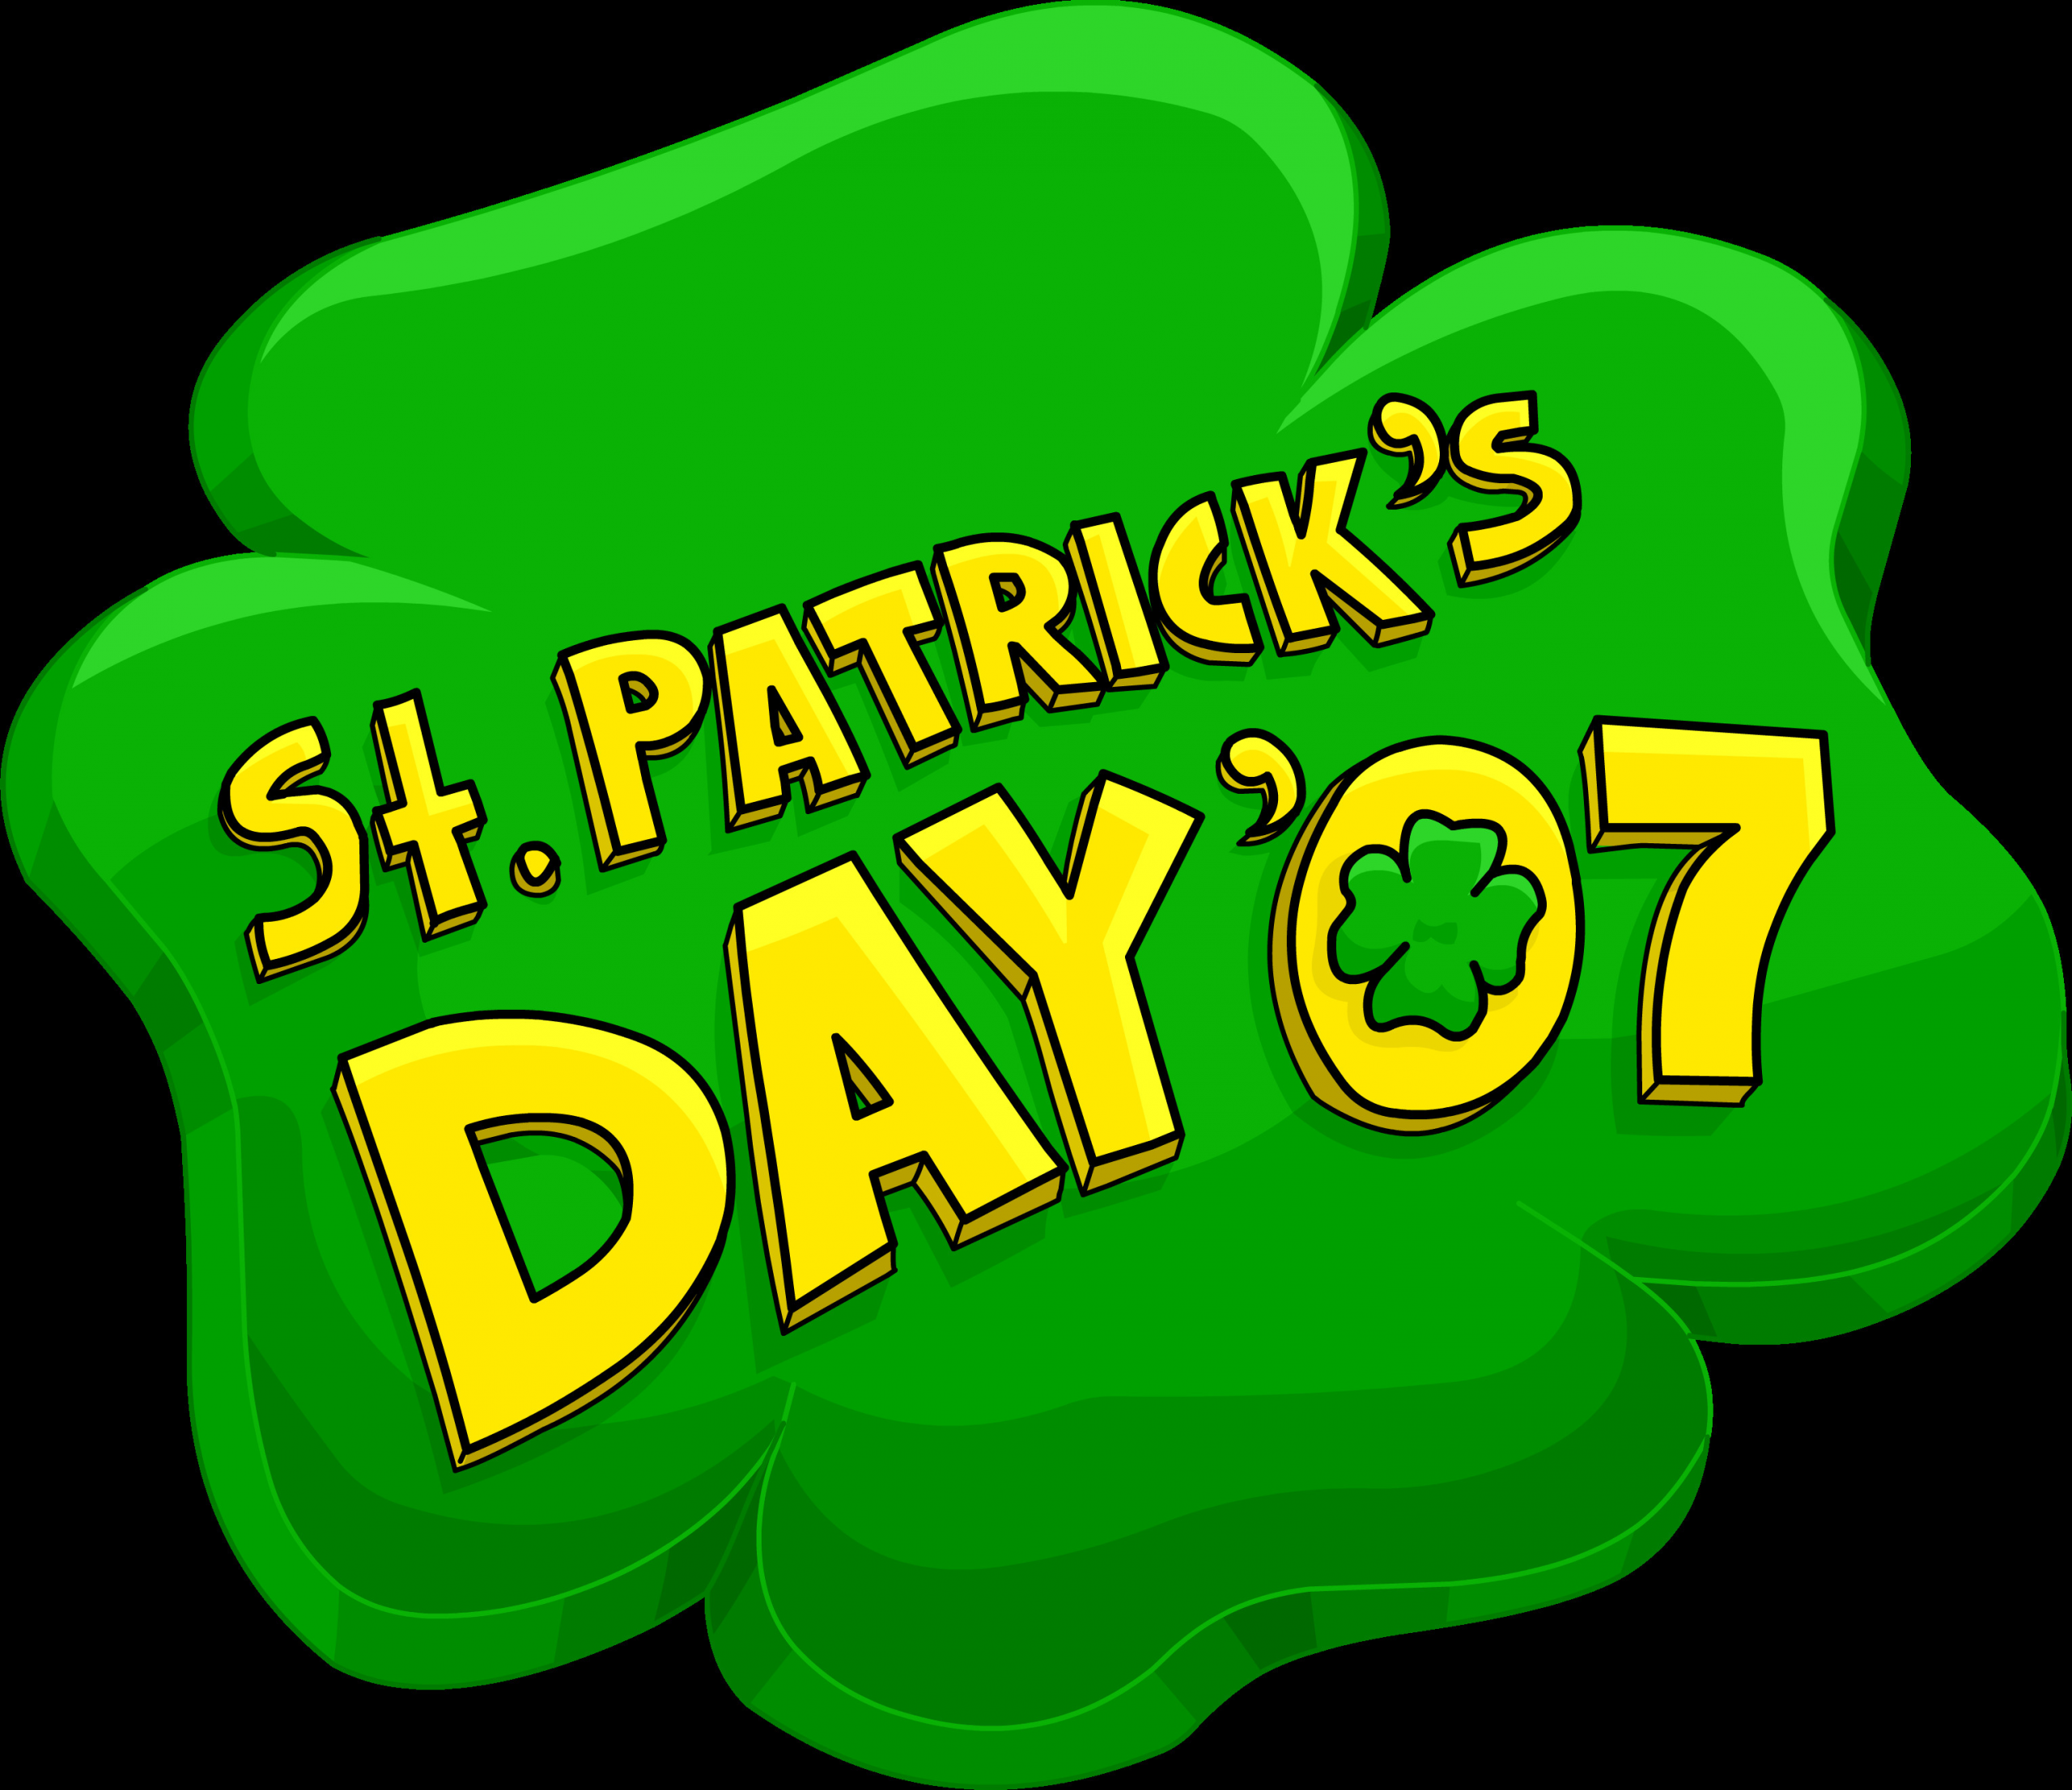 Best St Patrick's Day Party
 St Patrick s Day Party 2007 Club Penguin Wiki